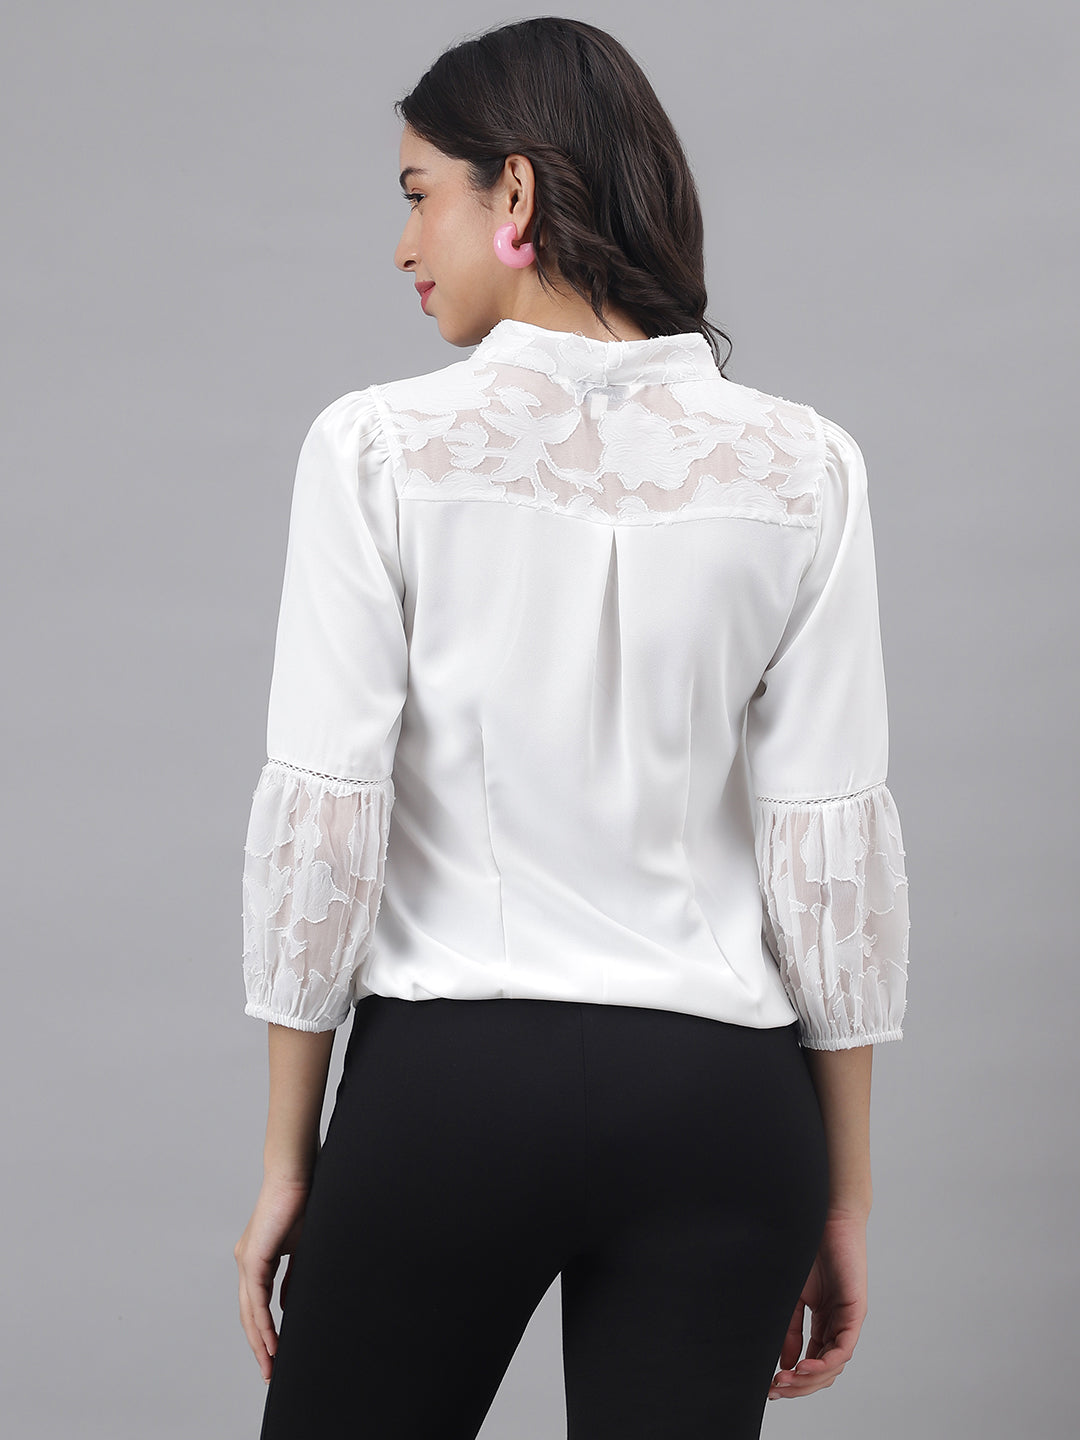 White 3/4 Sleeve Tie-Up Neck Women Solid Top